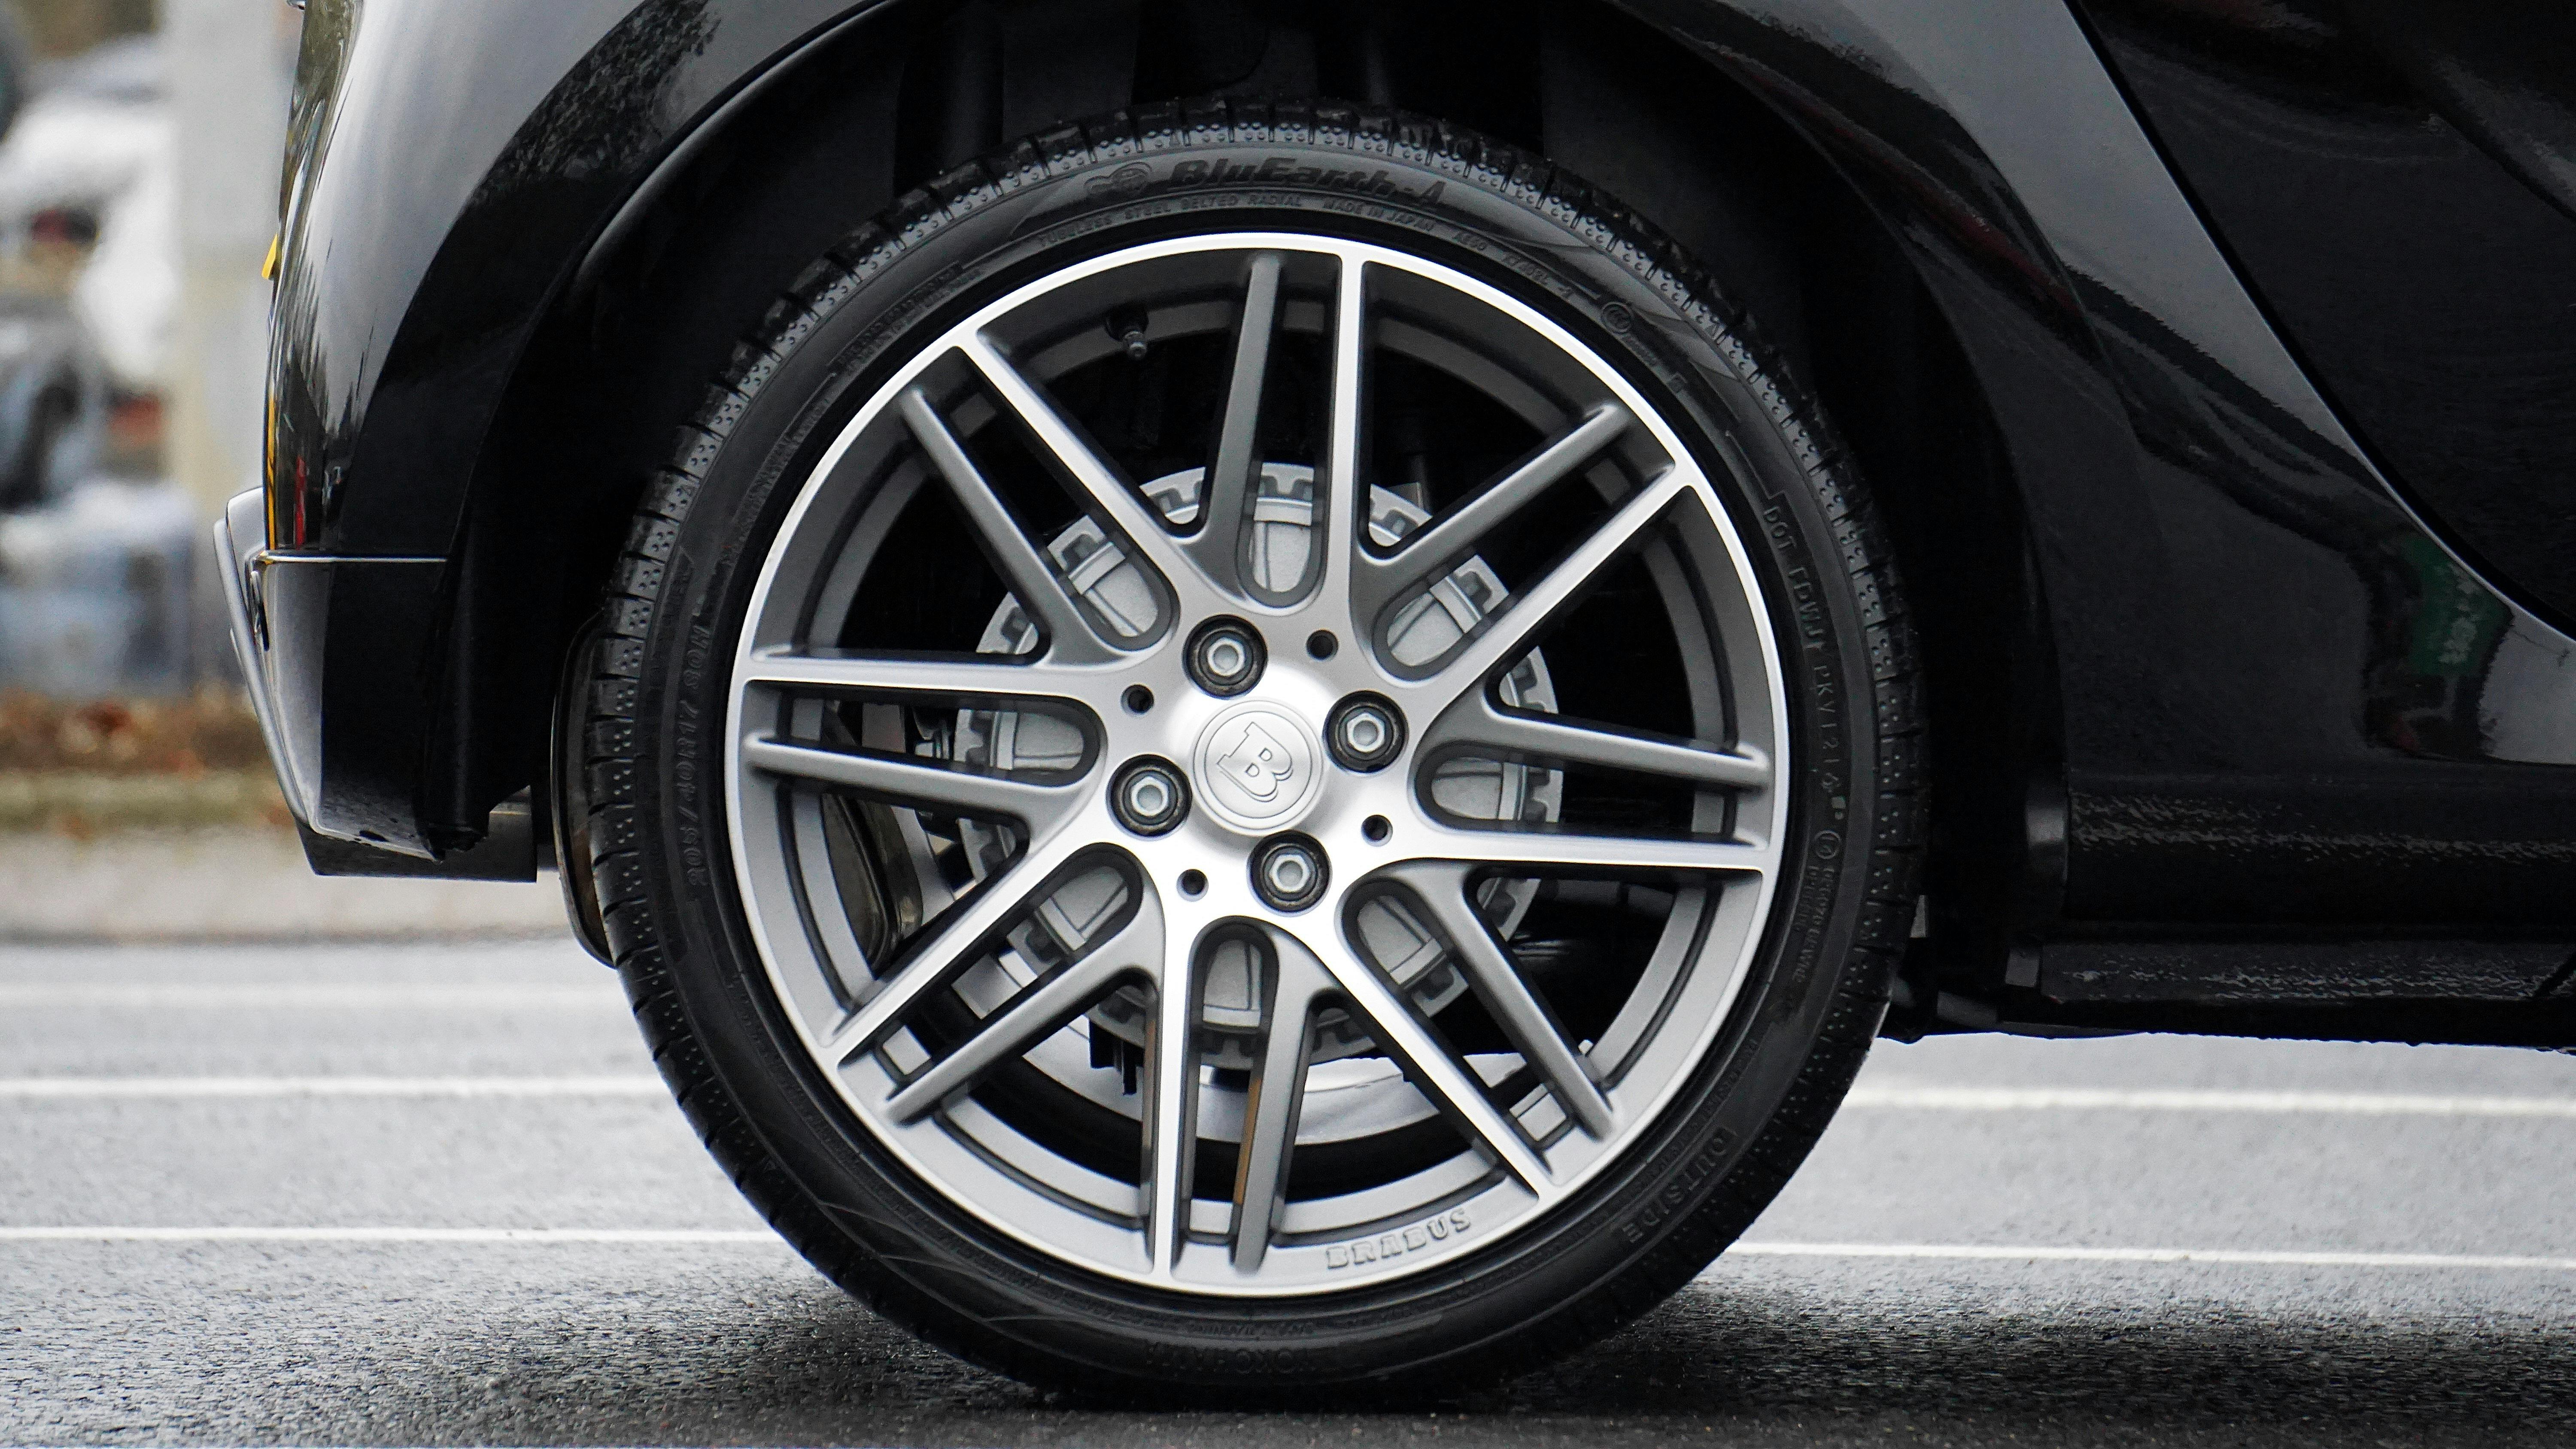 Wheel Photos, Download The BEST Free Wheel Stock Photos & HD Images